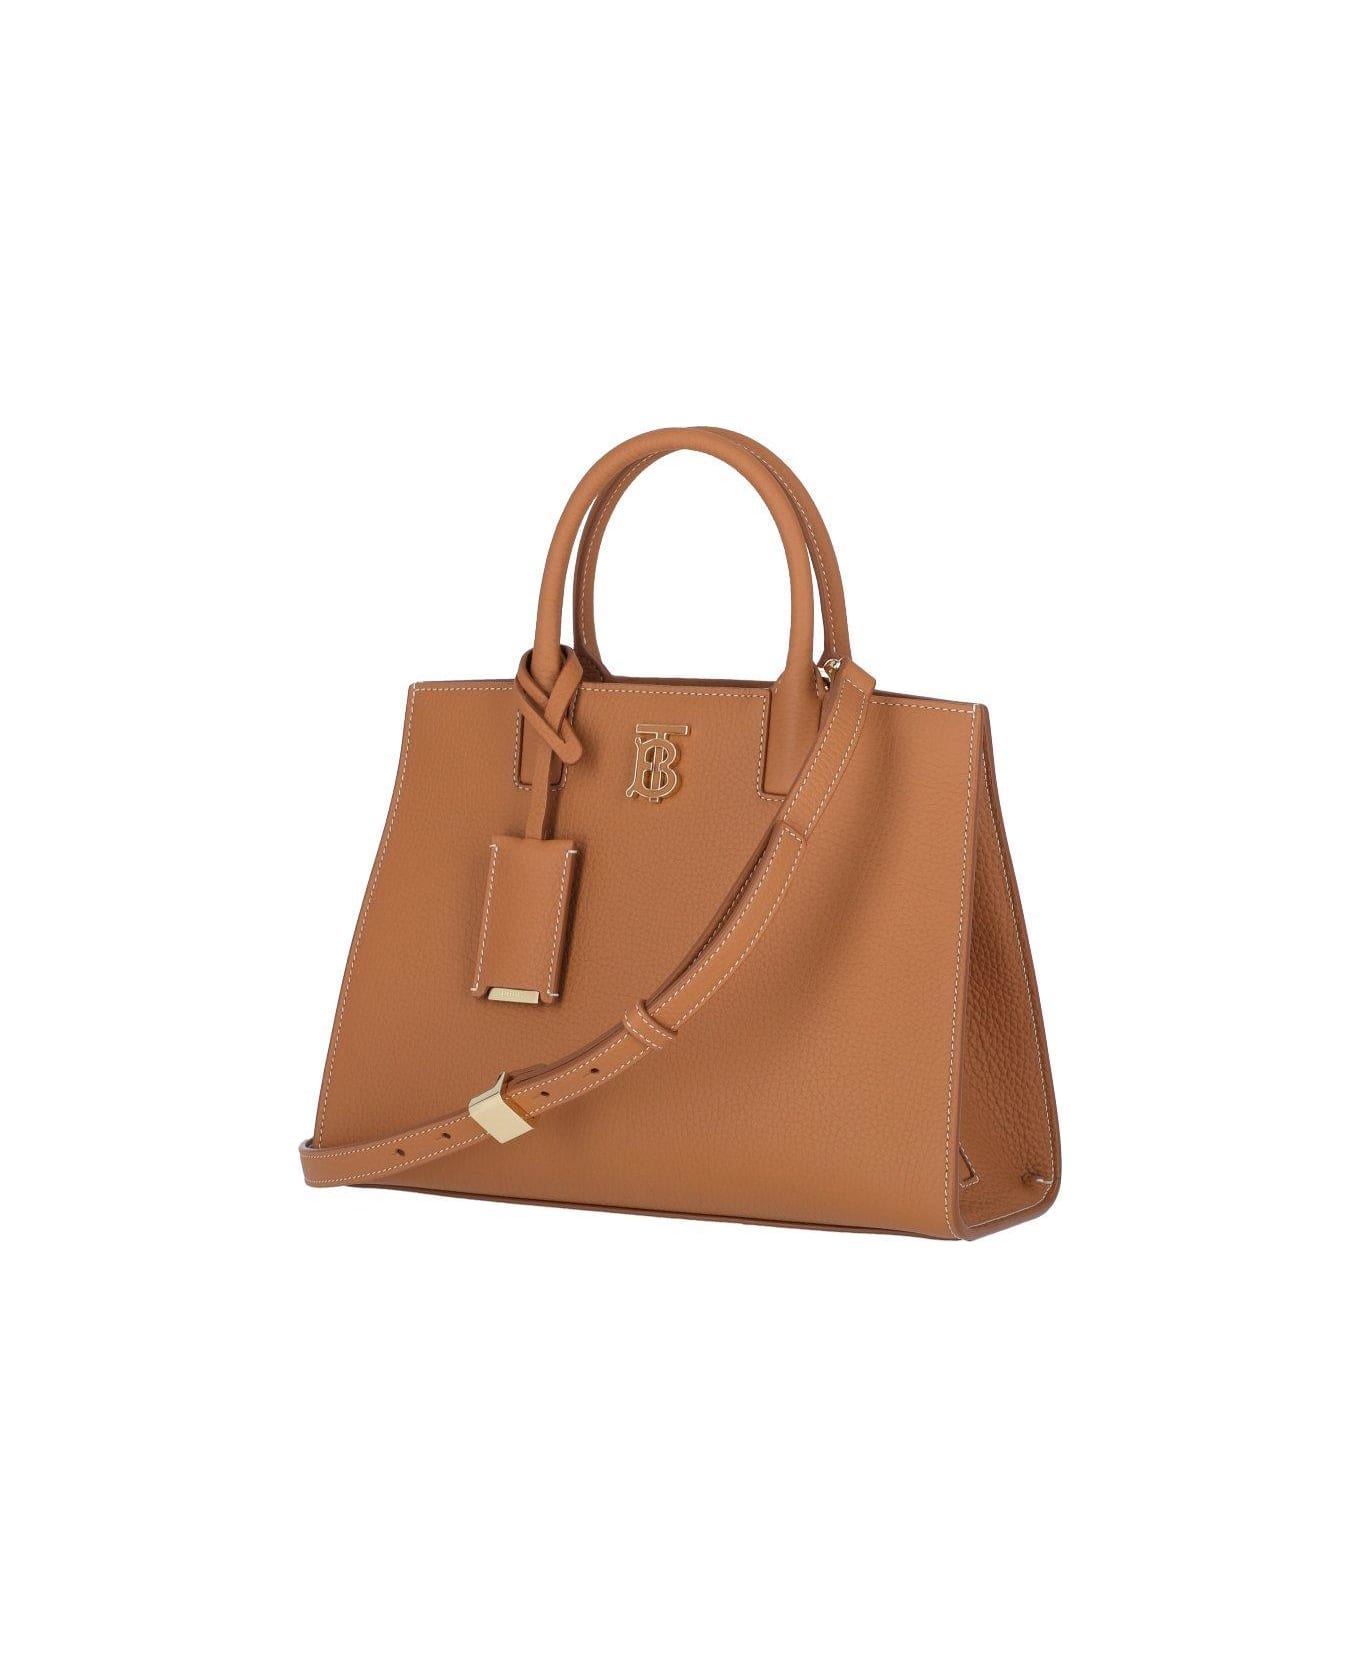 Burberry Mini Frances Top Handle Bag - is the perfect bag for overnight stays and weekends away